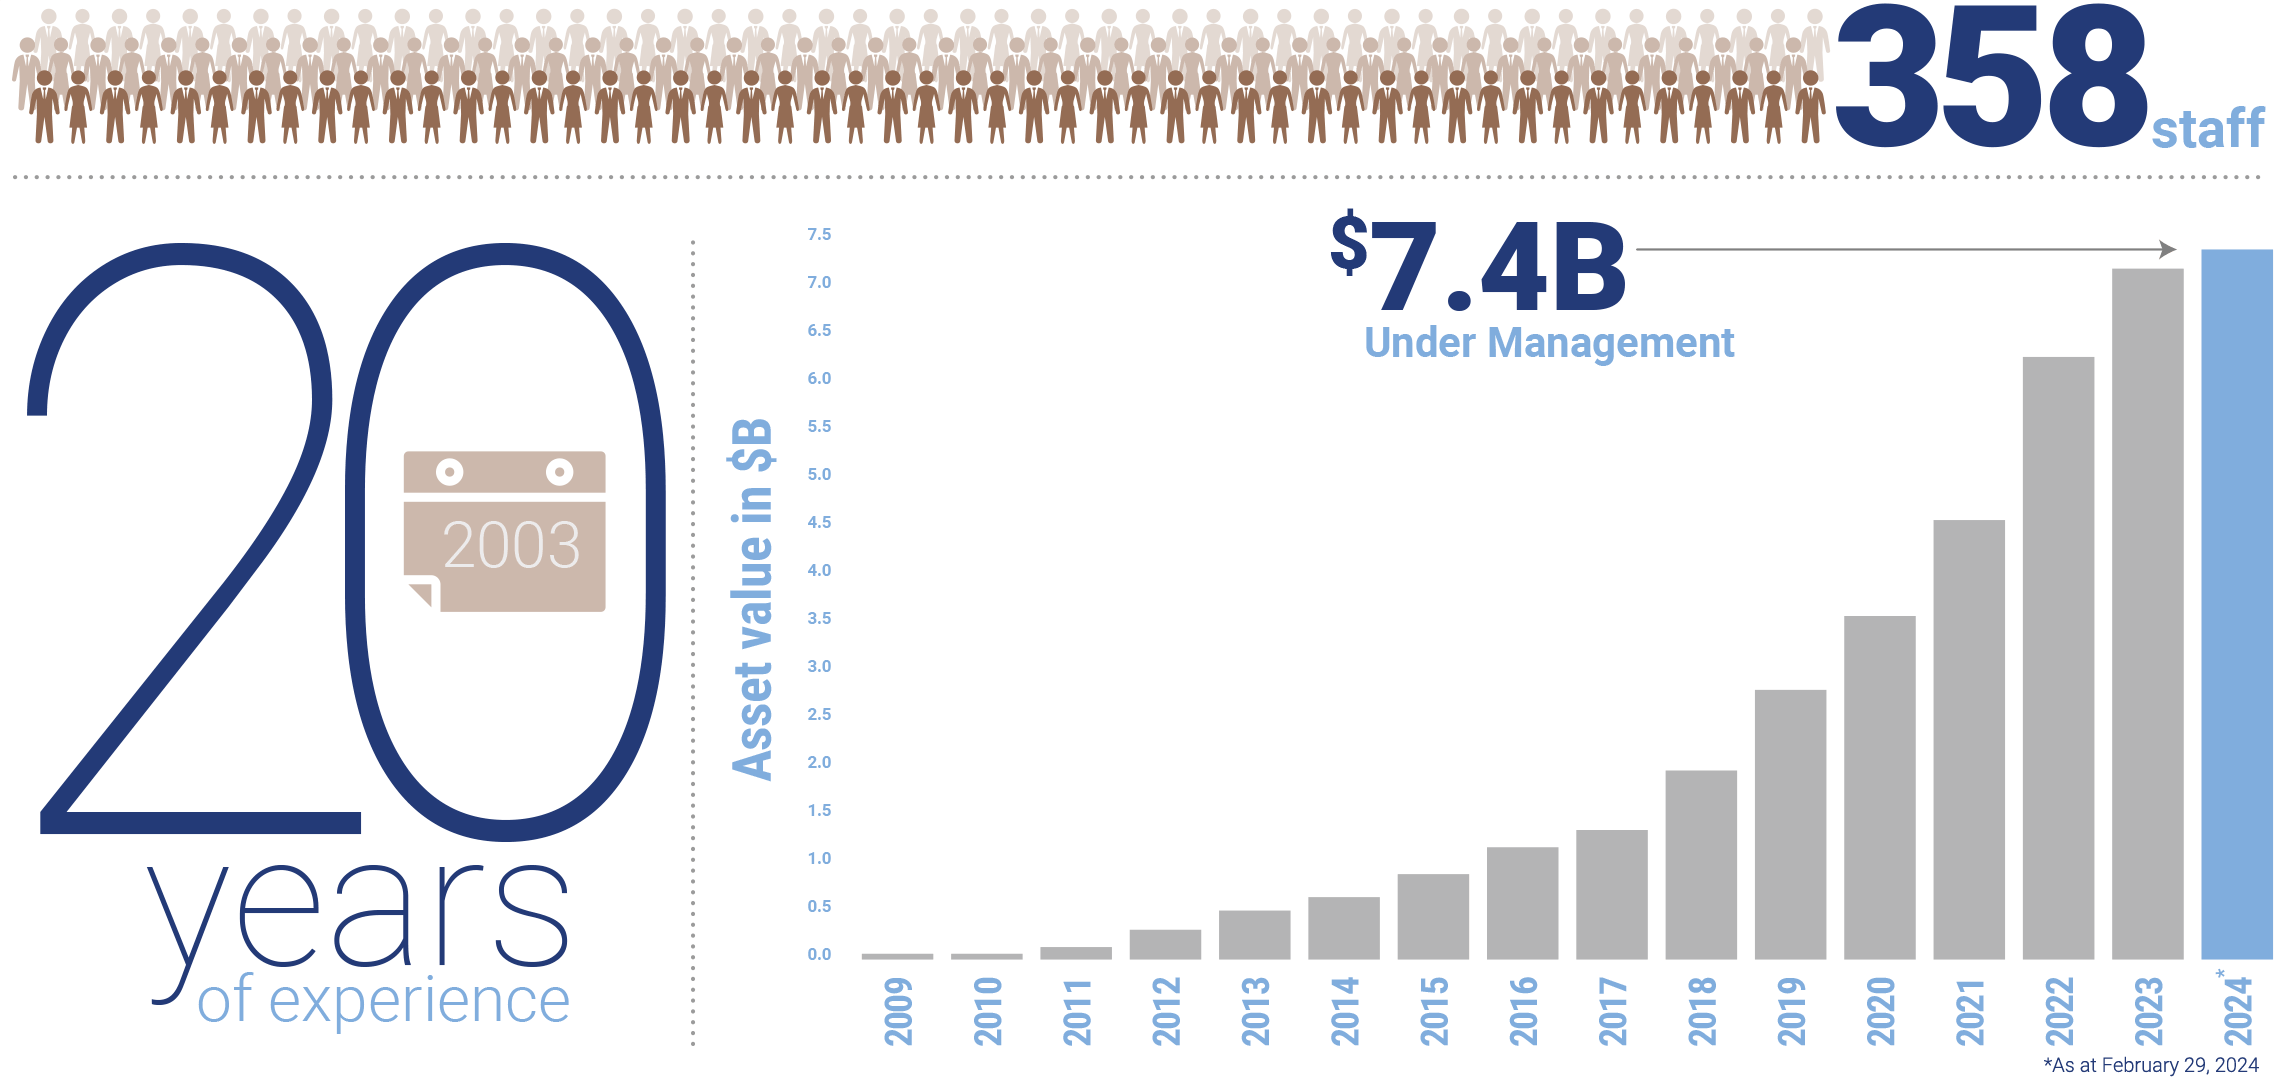 19 years of experience, 320 staff, over $6.2 billion under management as of September 30, 2022